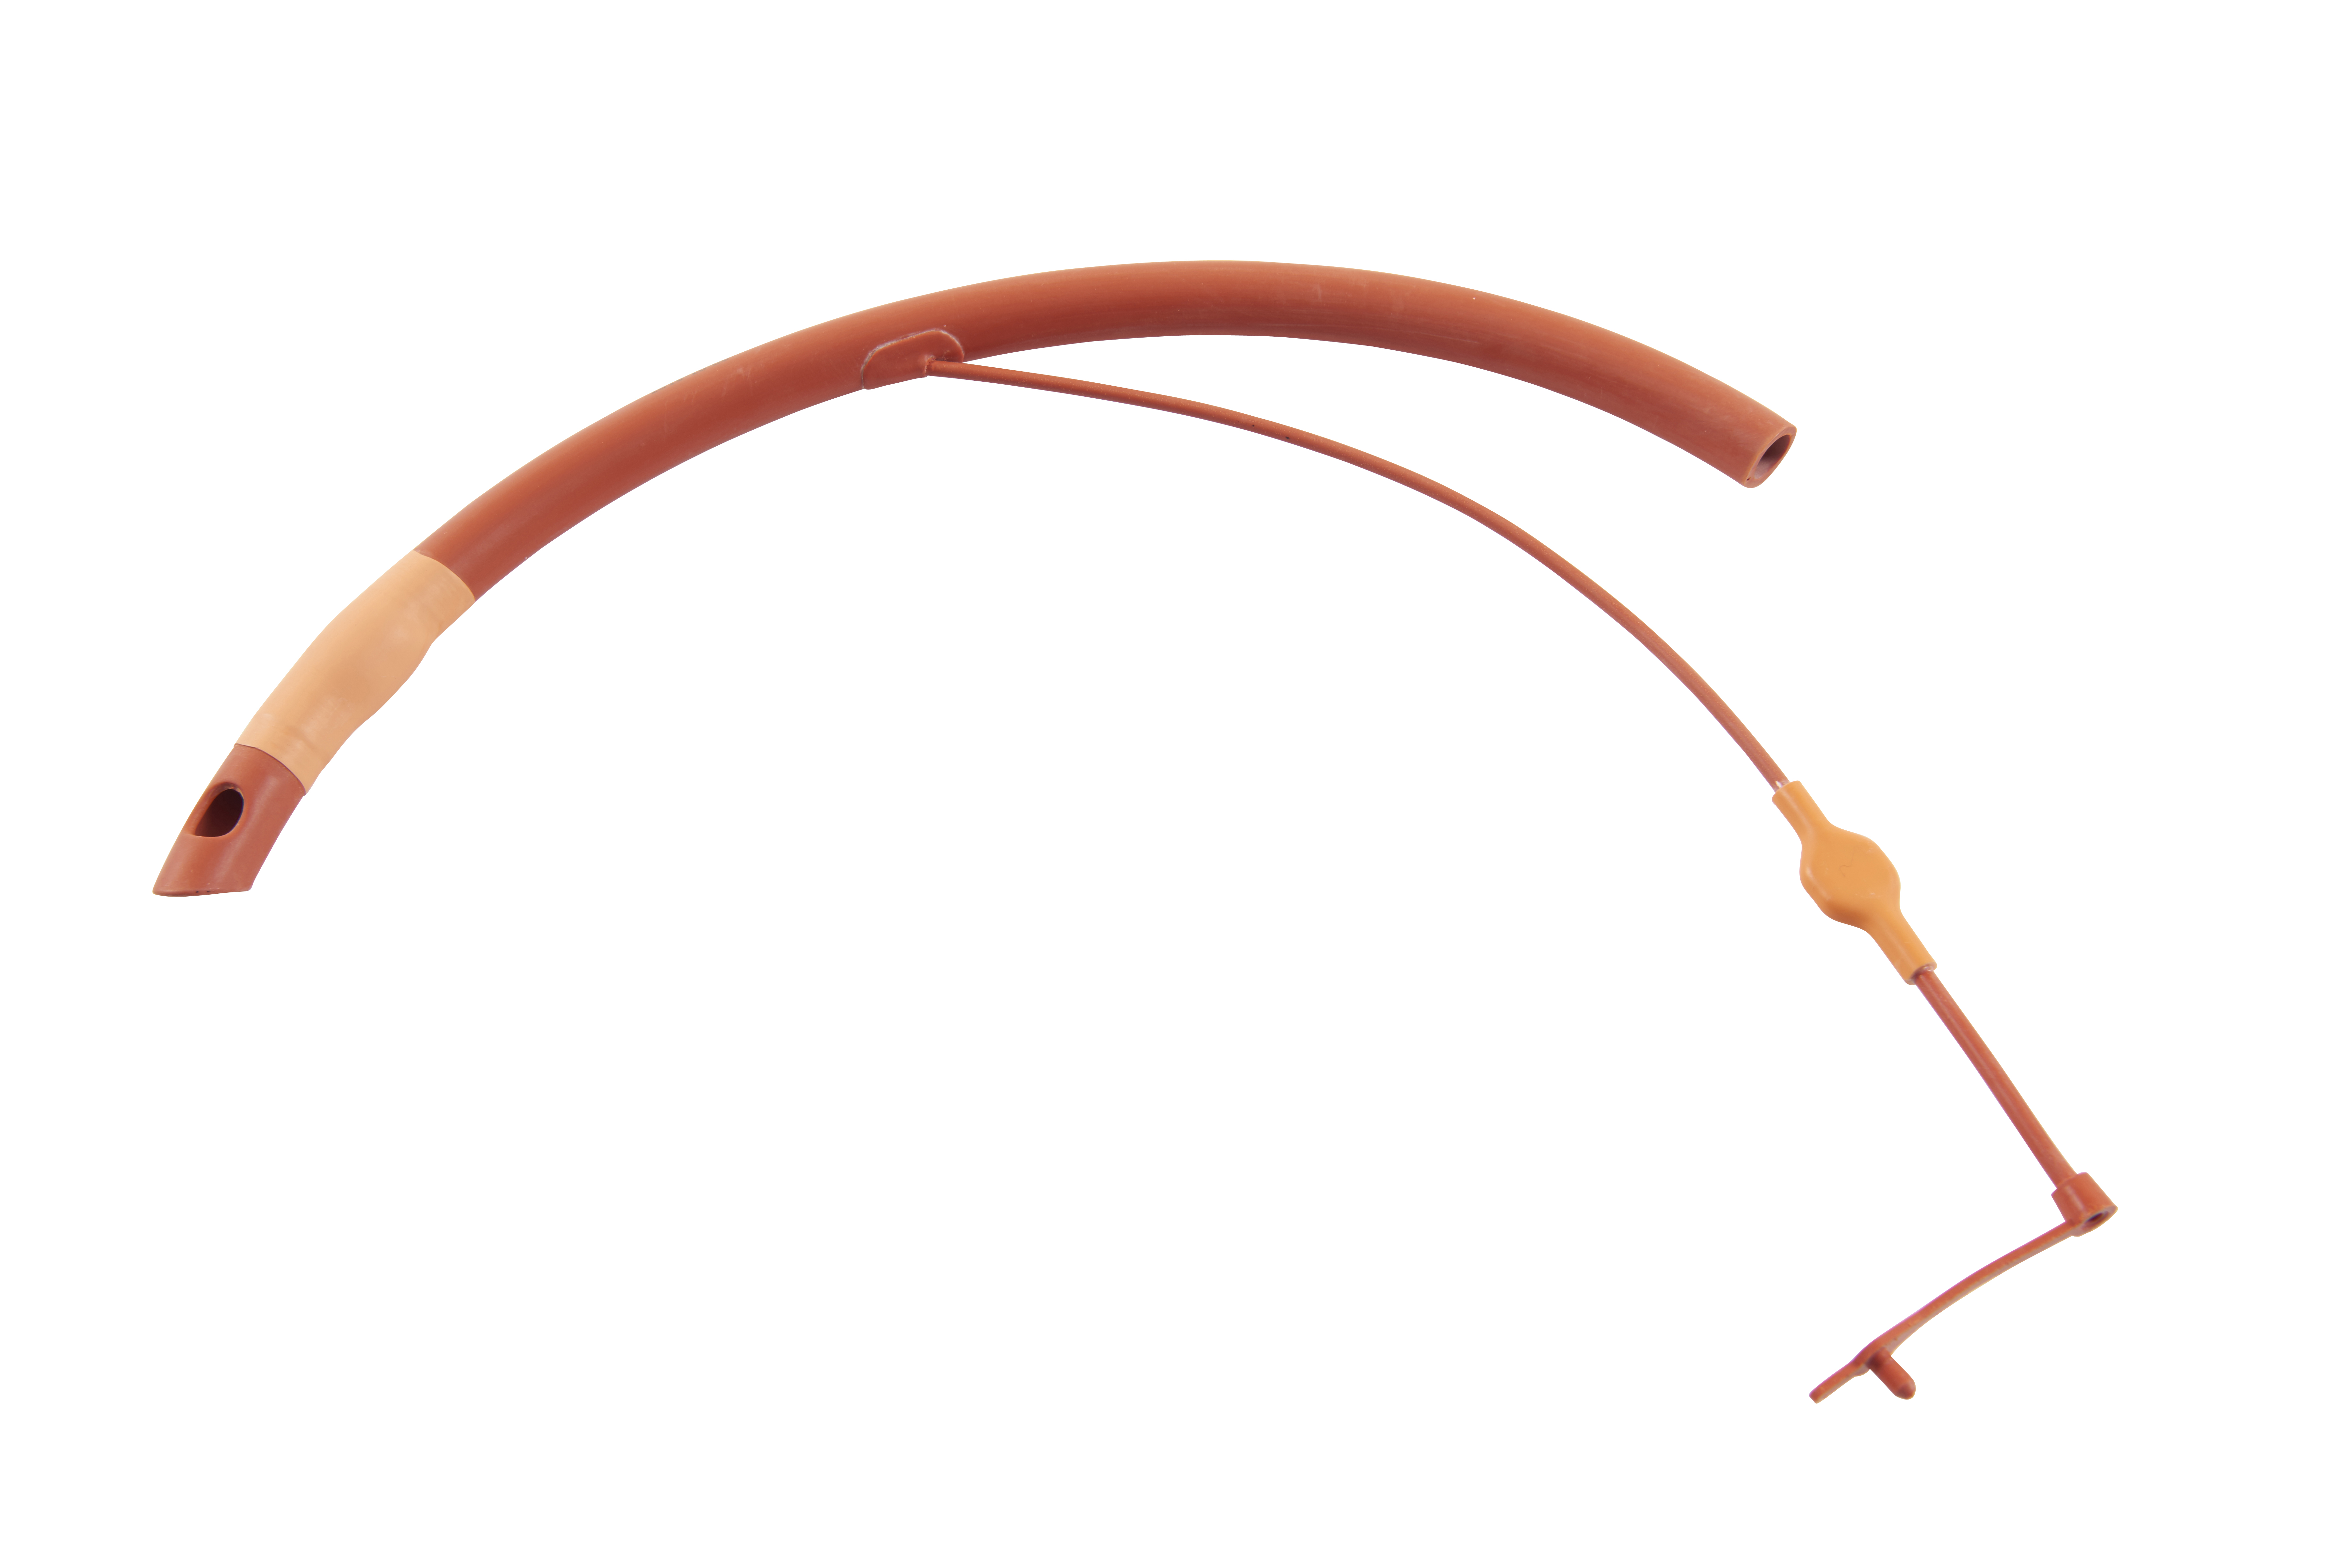 KRUUSE tracheal tube in red rubber w/Murphy eye, 11 mm